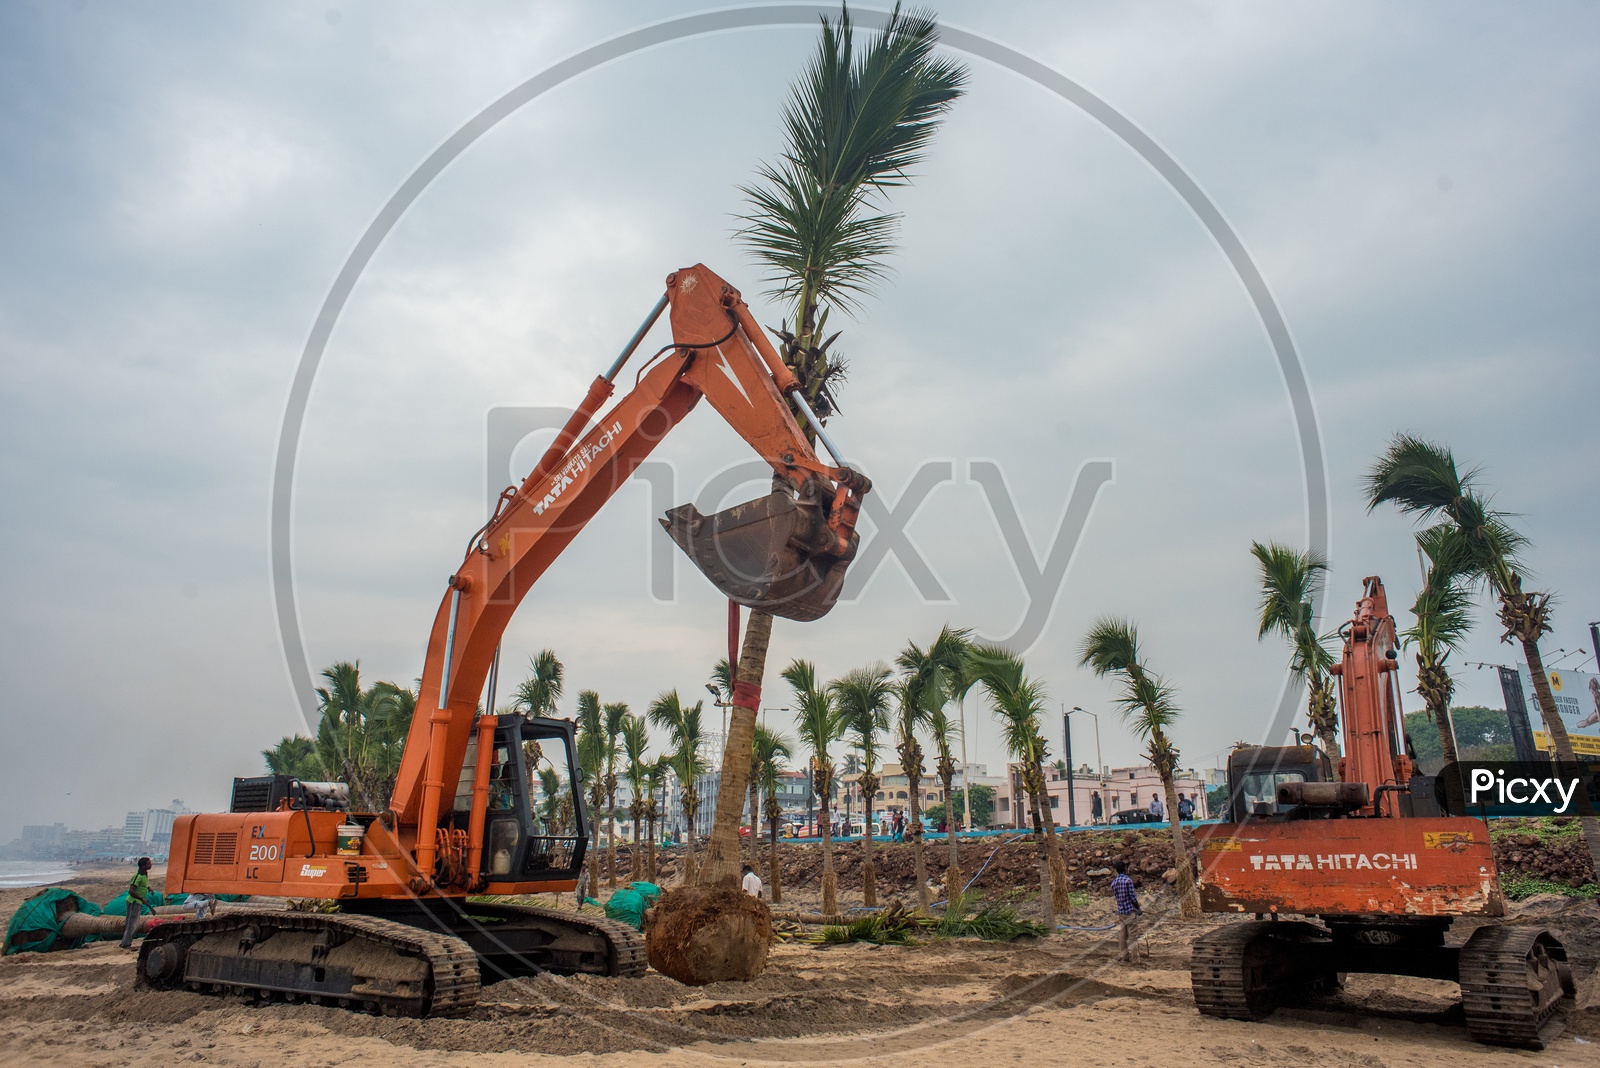 fully grown coconut trees being transplanted to vizag beach road for tourism